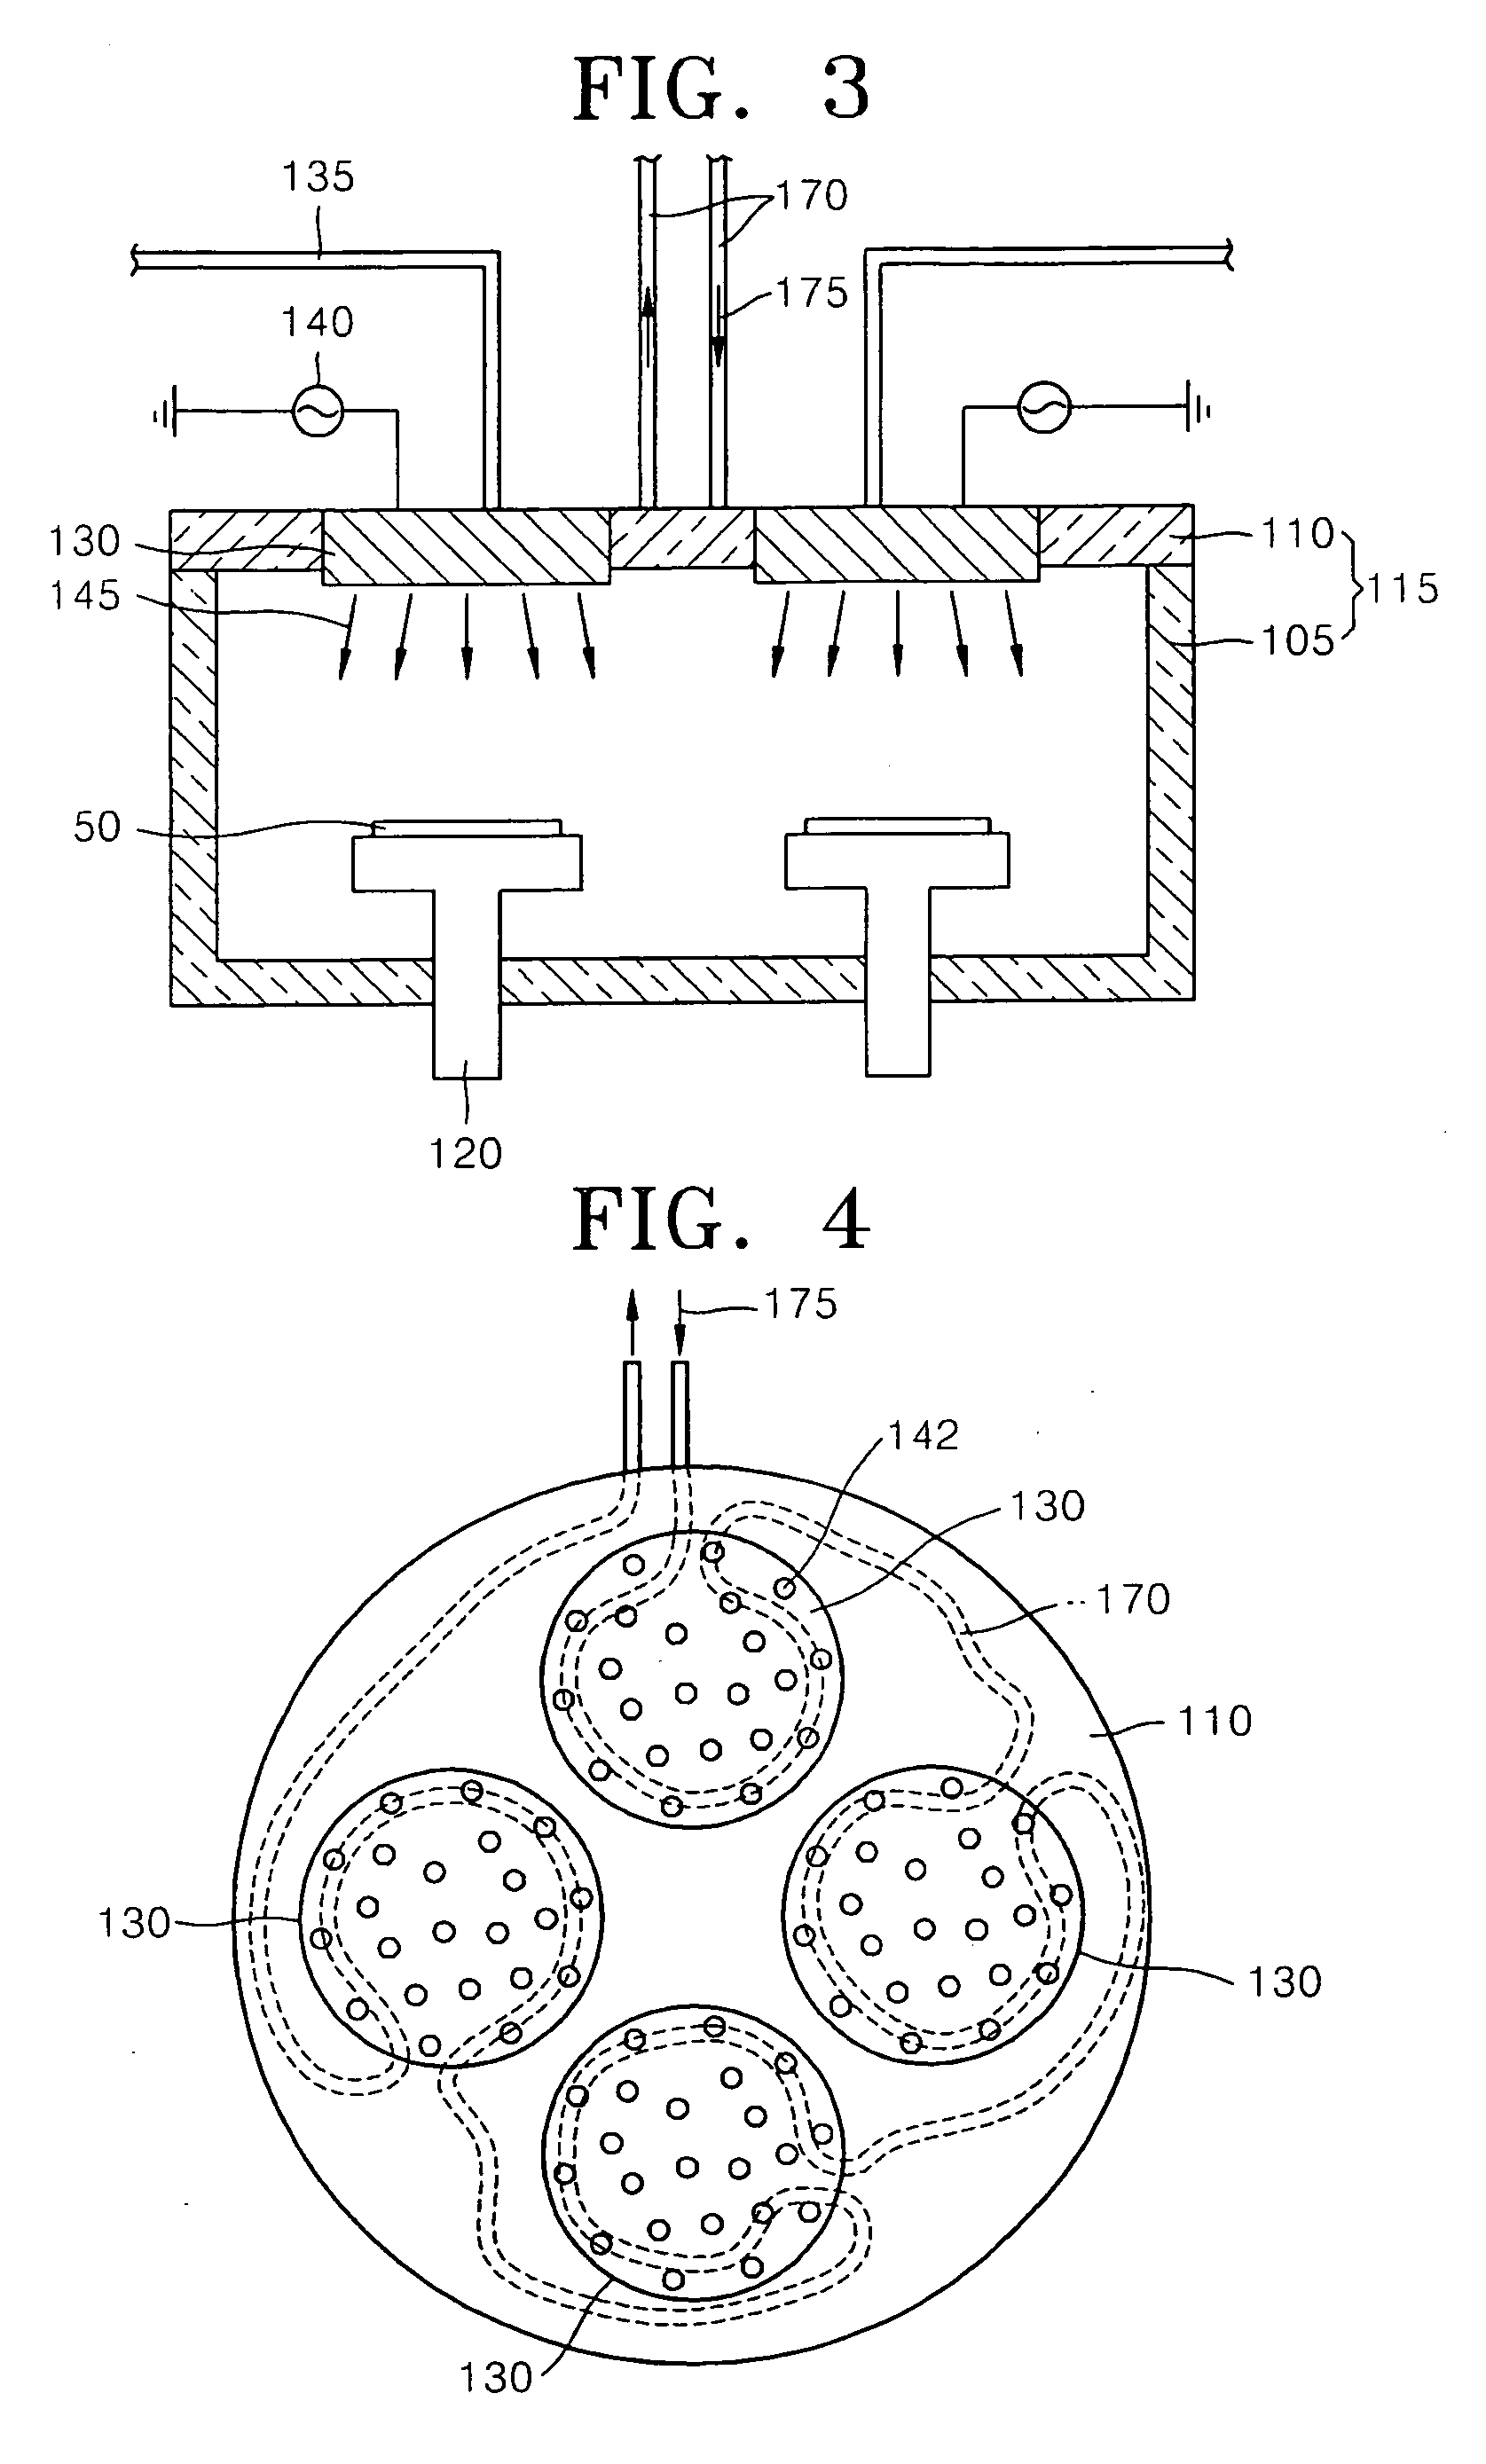 Apparatus and method for fabricating semiconductor devices and substrates